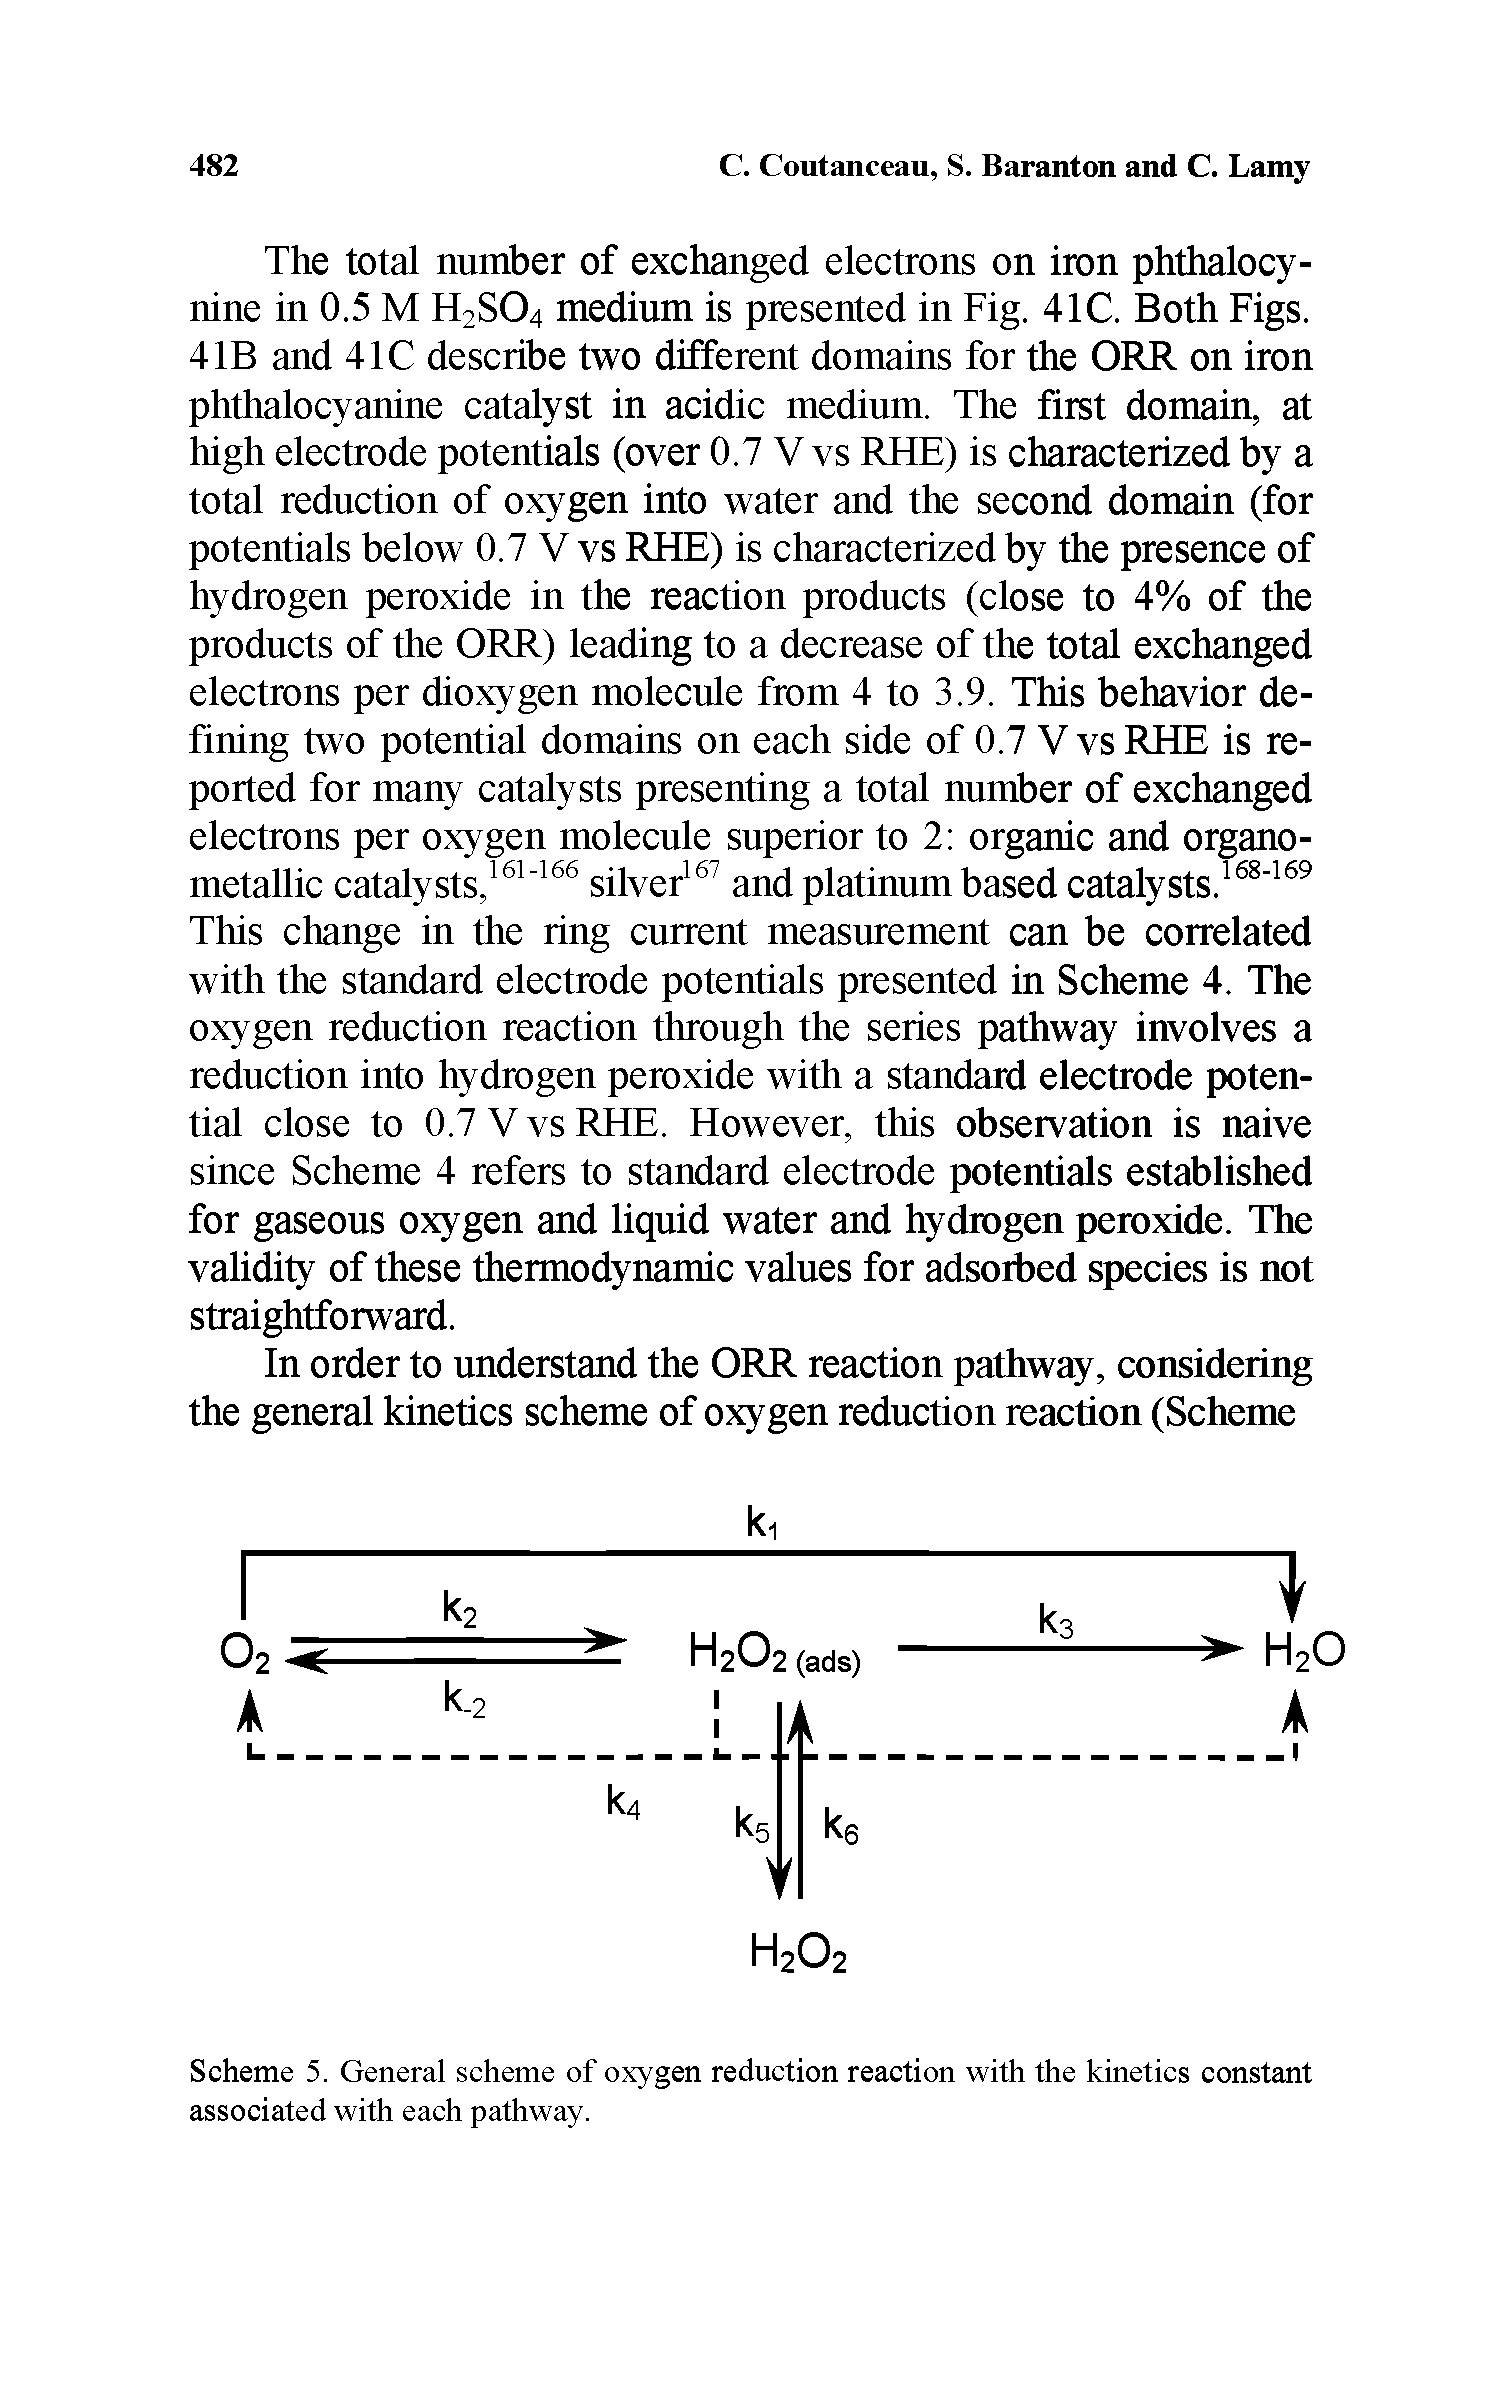 Scheme 5. General scheme of oxygen reduction reaction with the kinetics constant associated with each pathway.